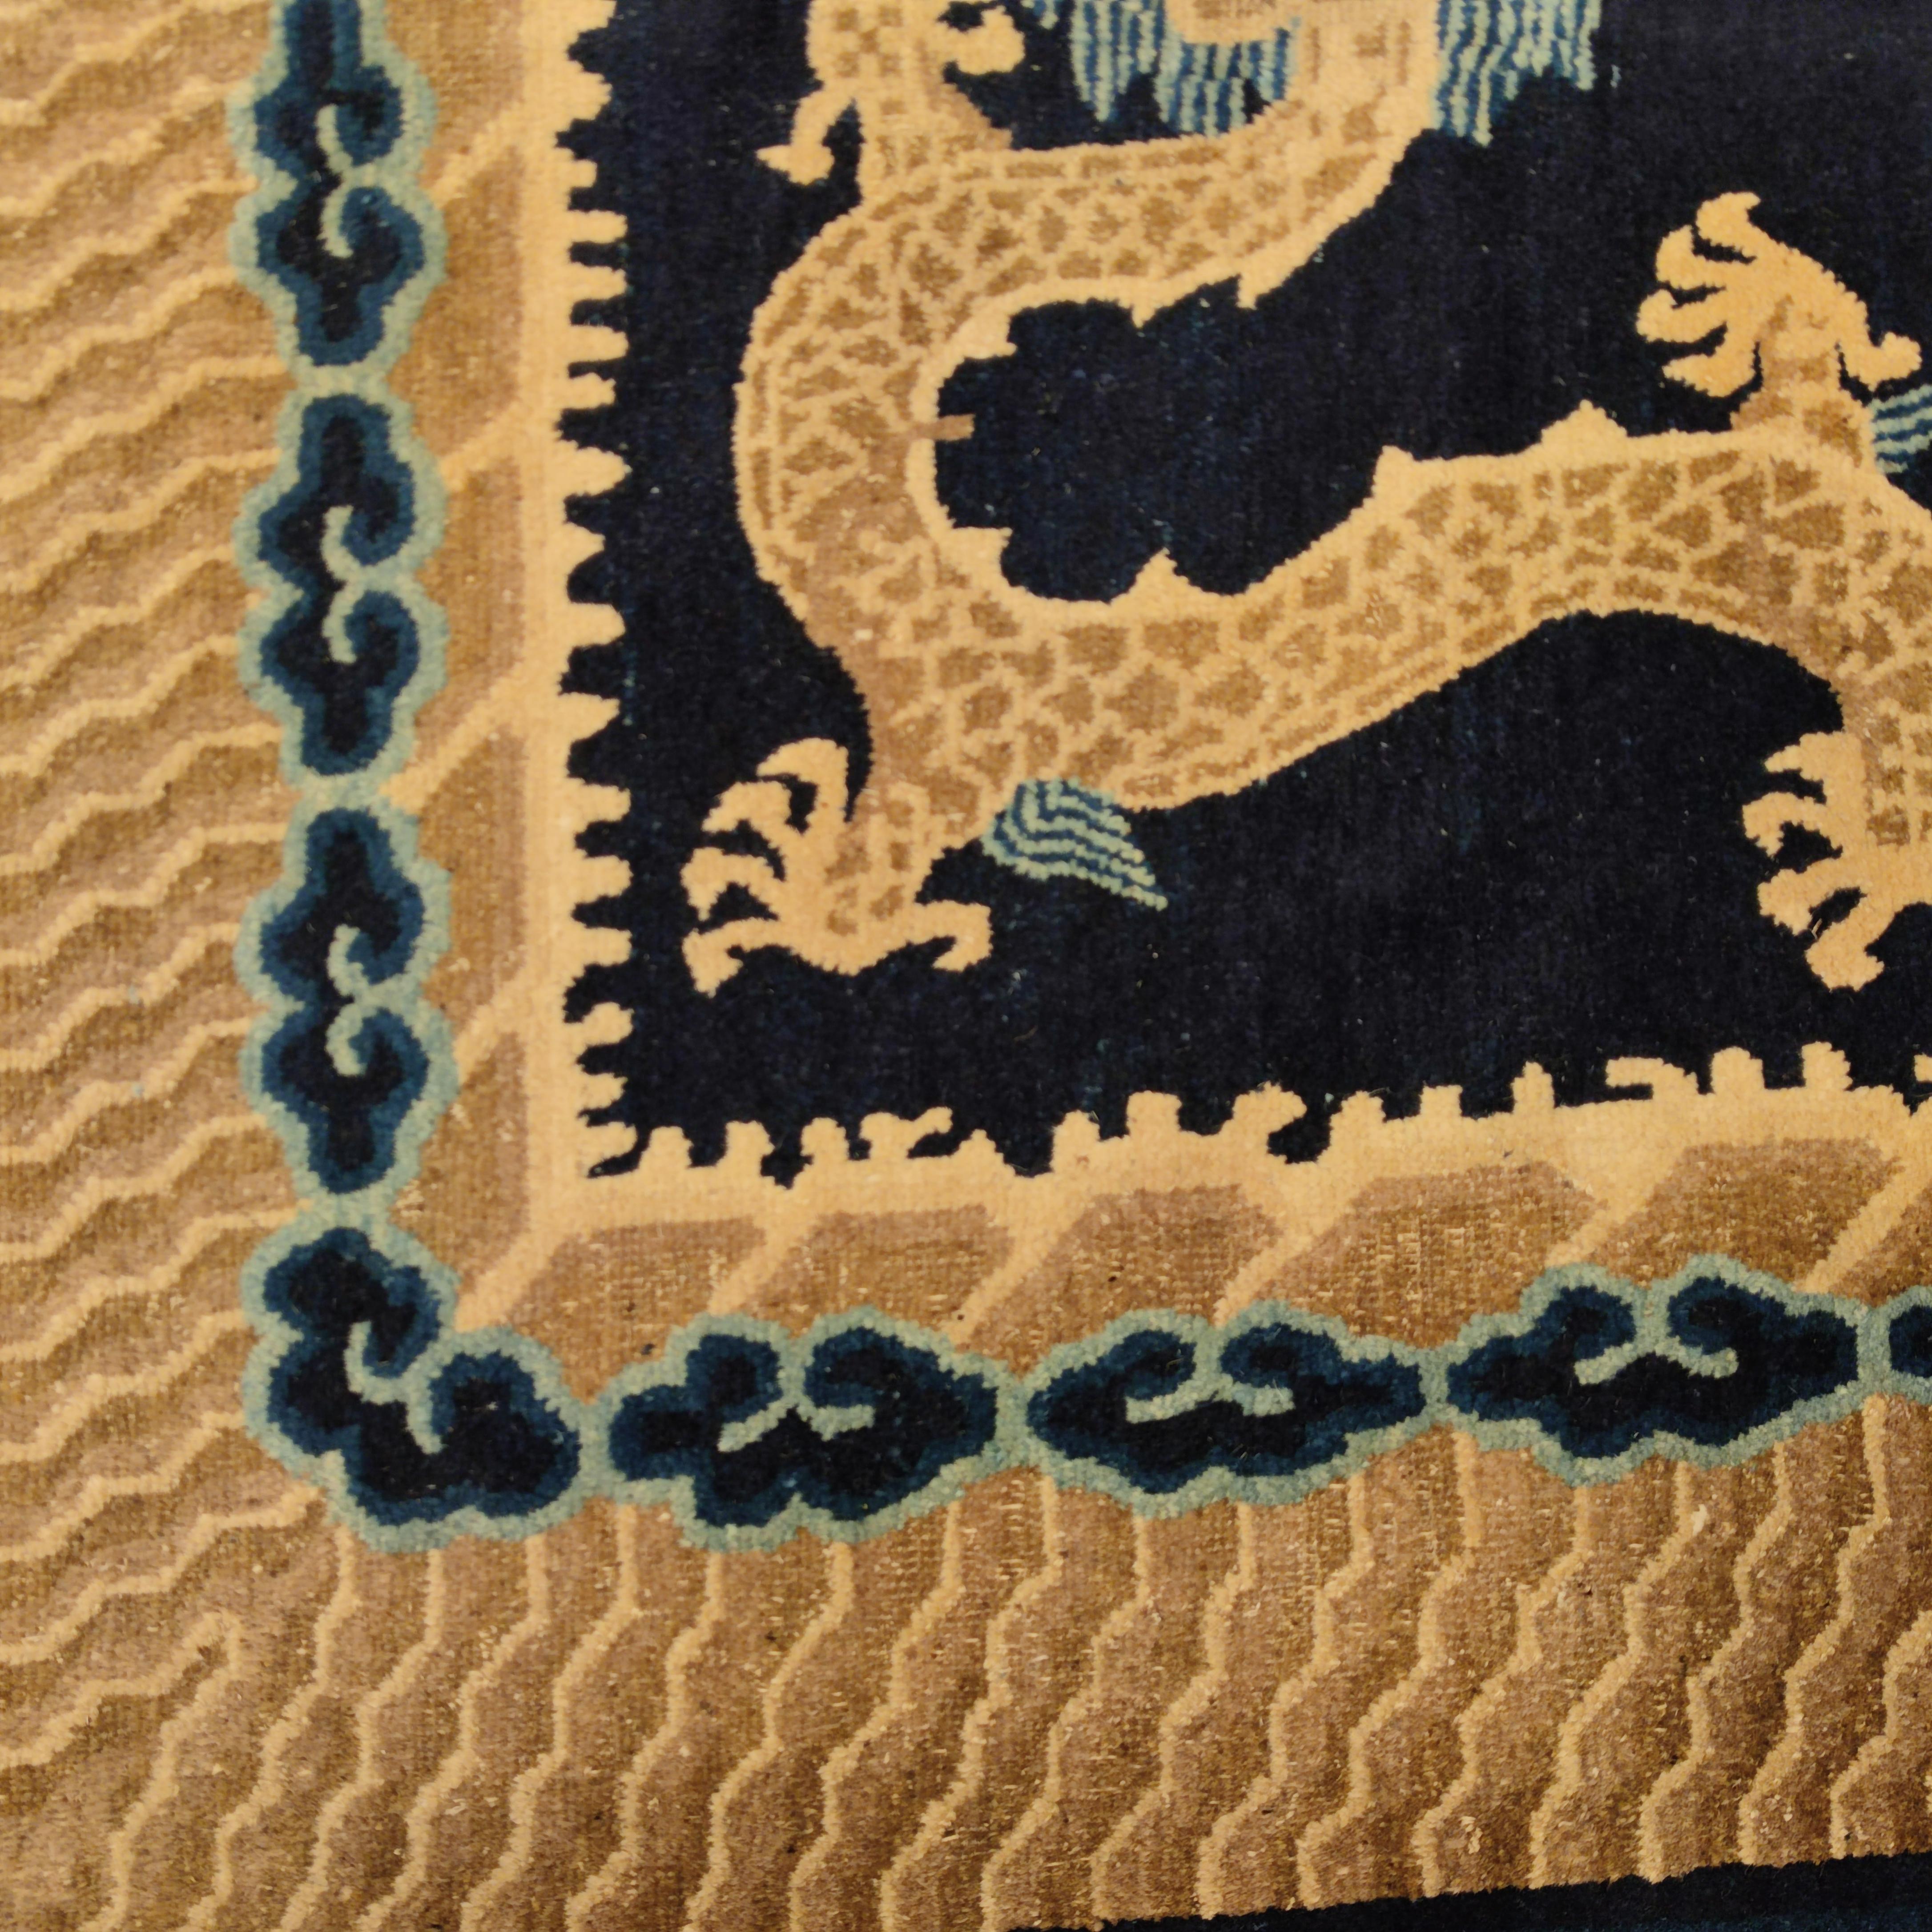 A central, five-clawed dragon (the symbol of both the forces of nature and the Chinese emperor), is surrounded by four other dragons, all floating on an indigo blue background. At both ends a pair of dragons flank a flaming pearl (symbol of wisdom).